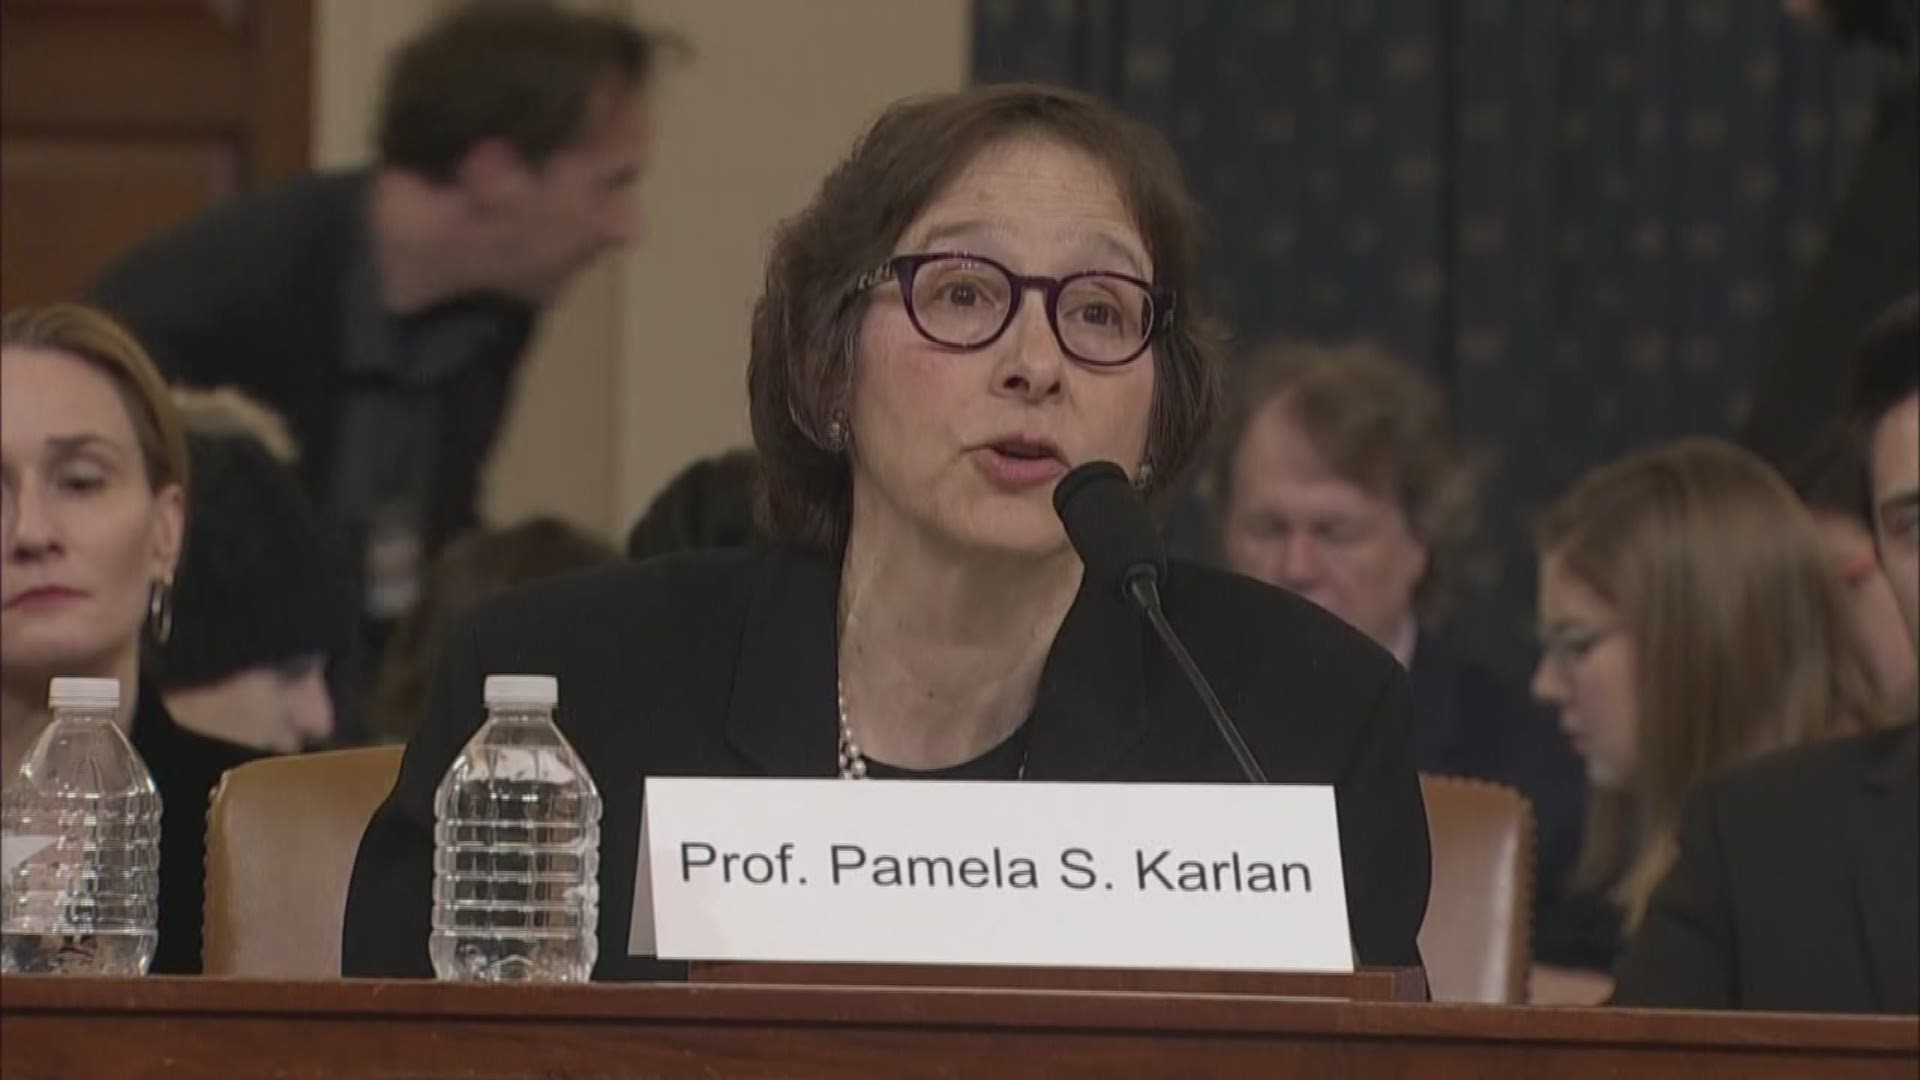 Stanford Law professor Pamela S. Karlan invoked Trump's son to make a point about the president's power at the Judiciary Committee's first impeachment hearing.